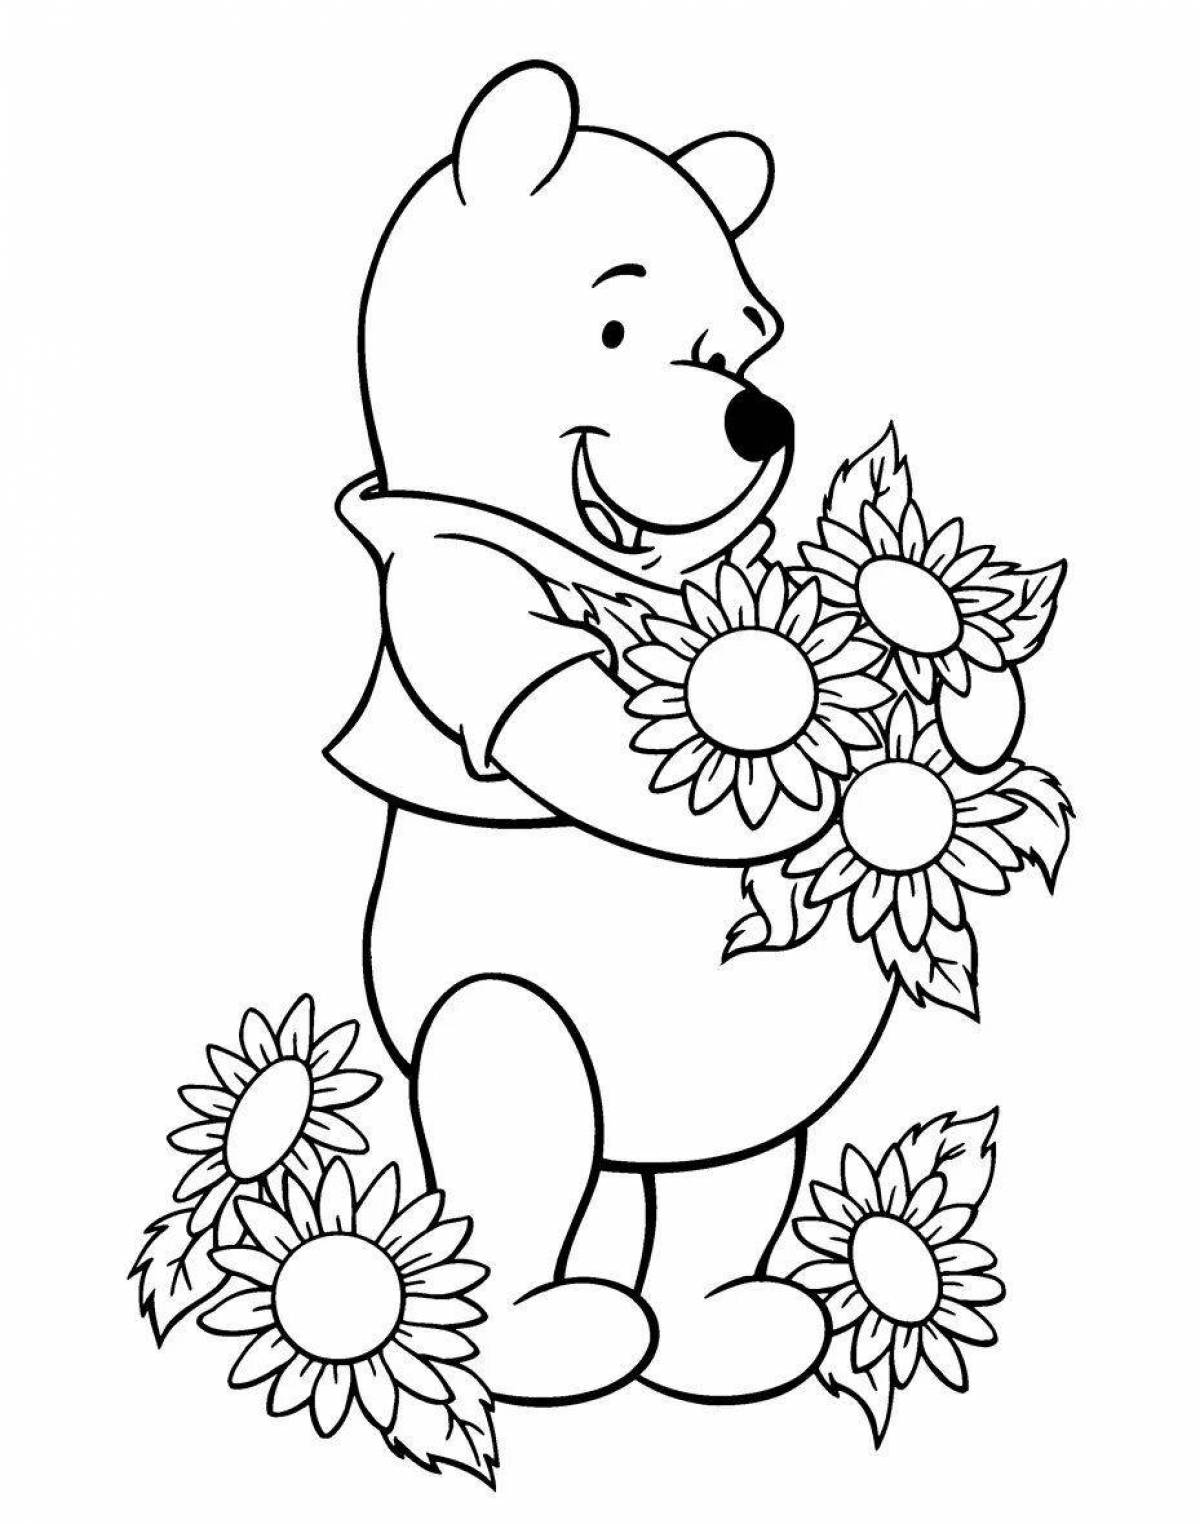 Whimsical teddy bear coloring book for 5-6 year olds